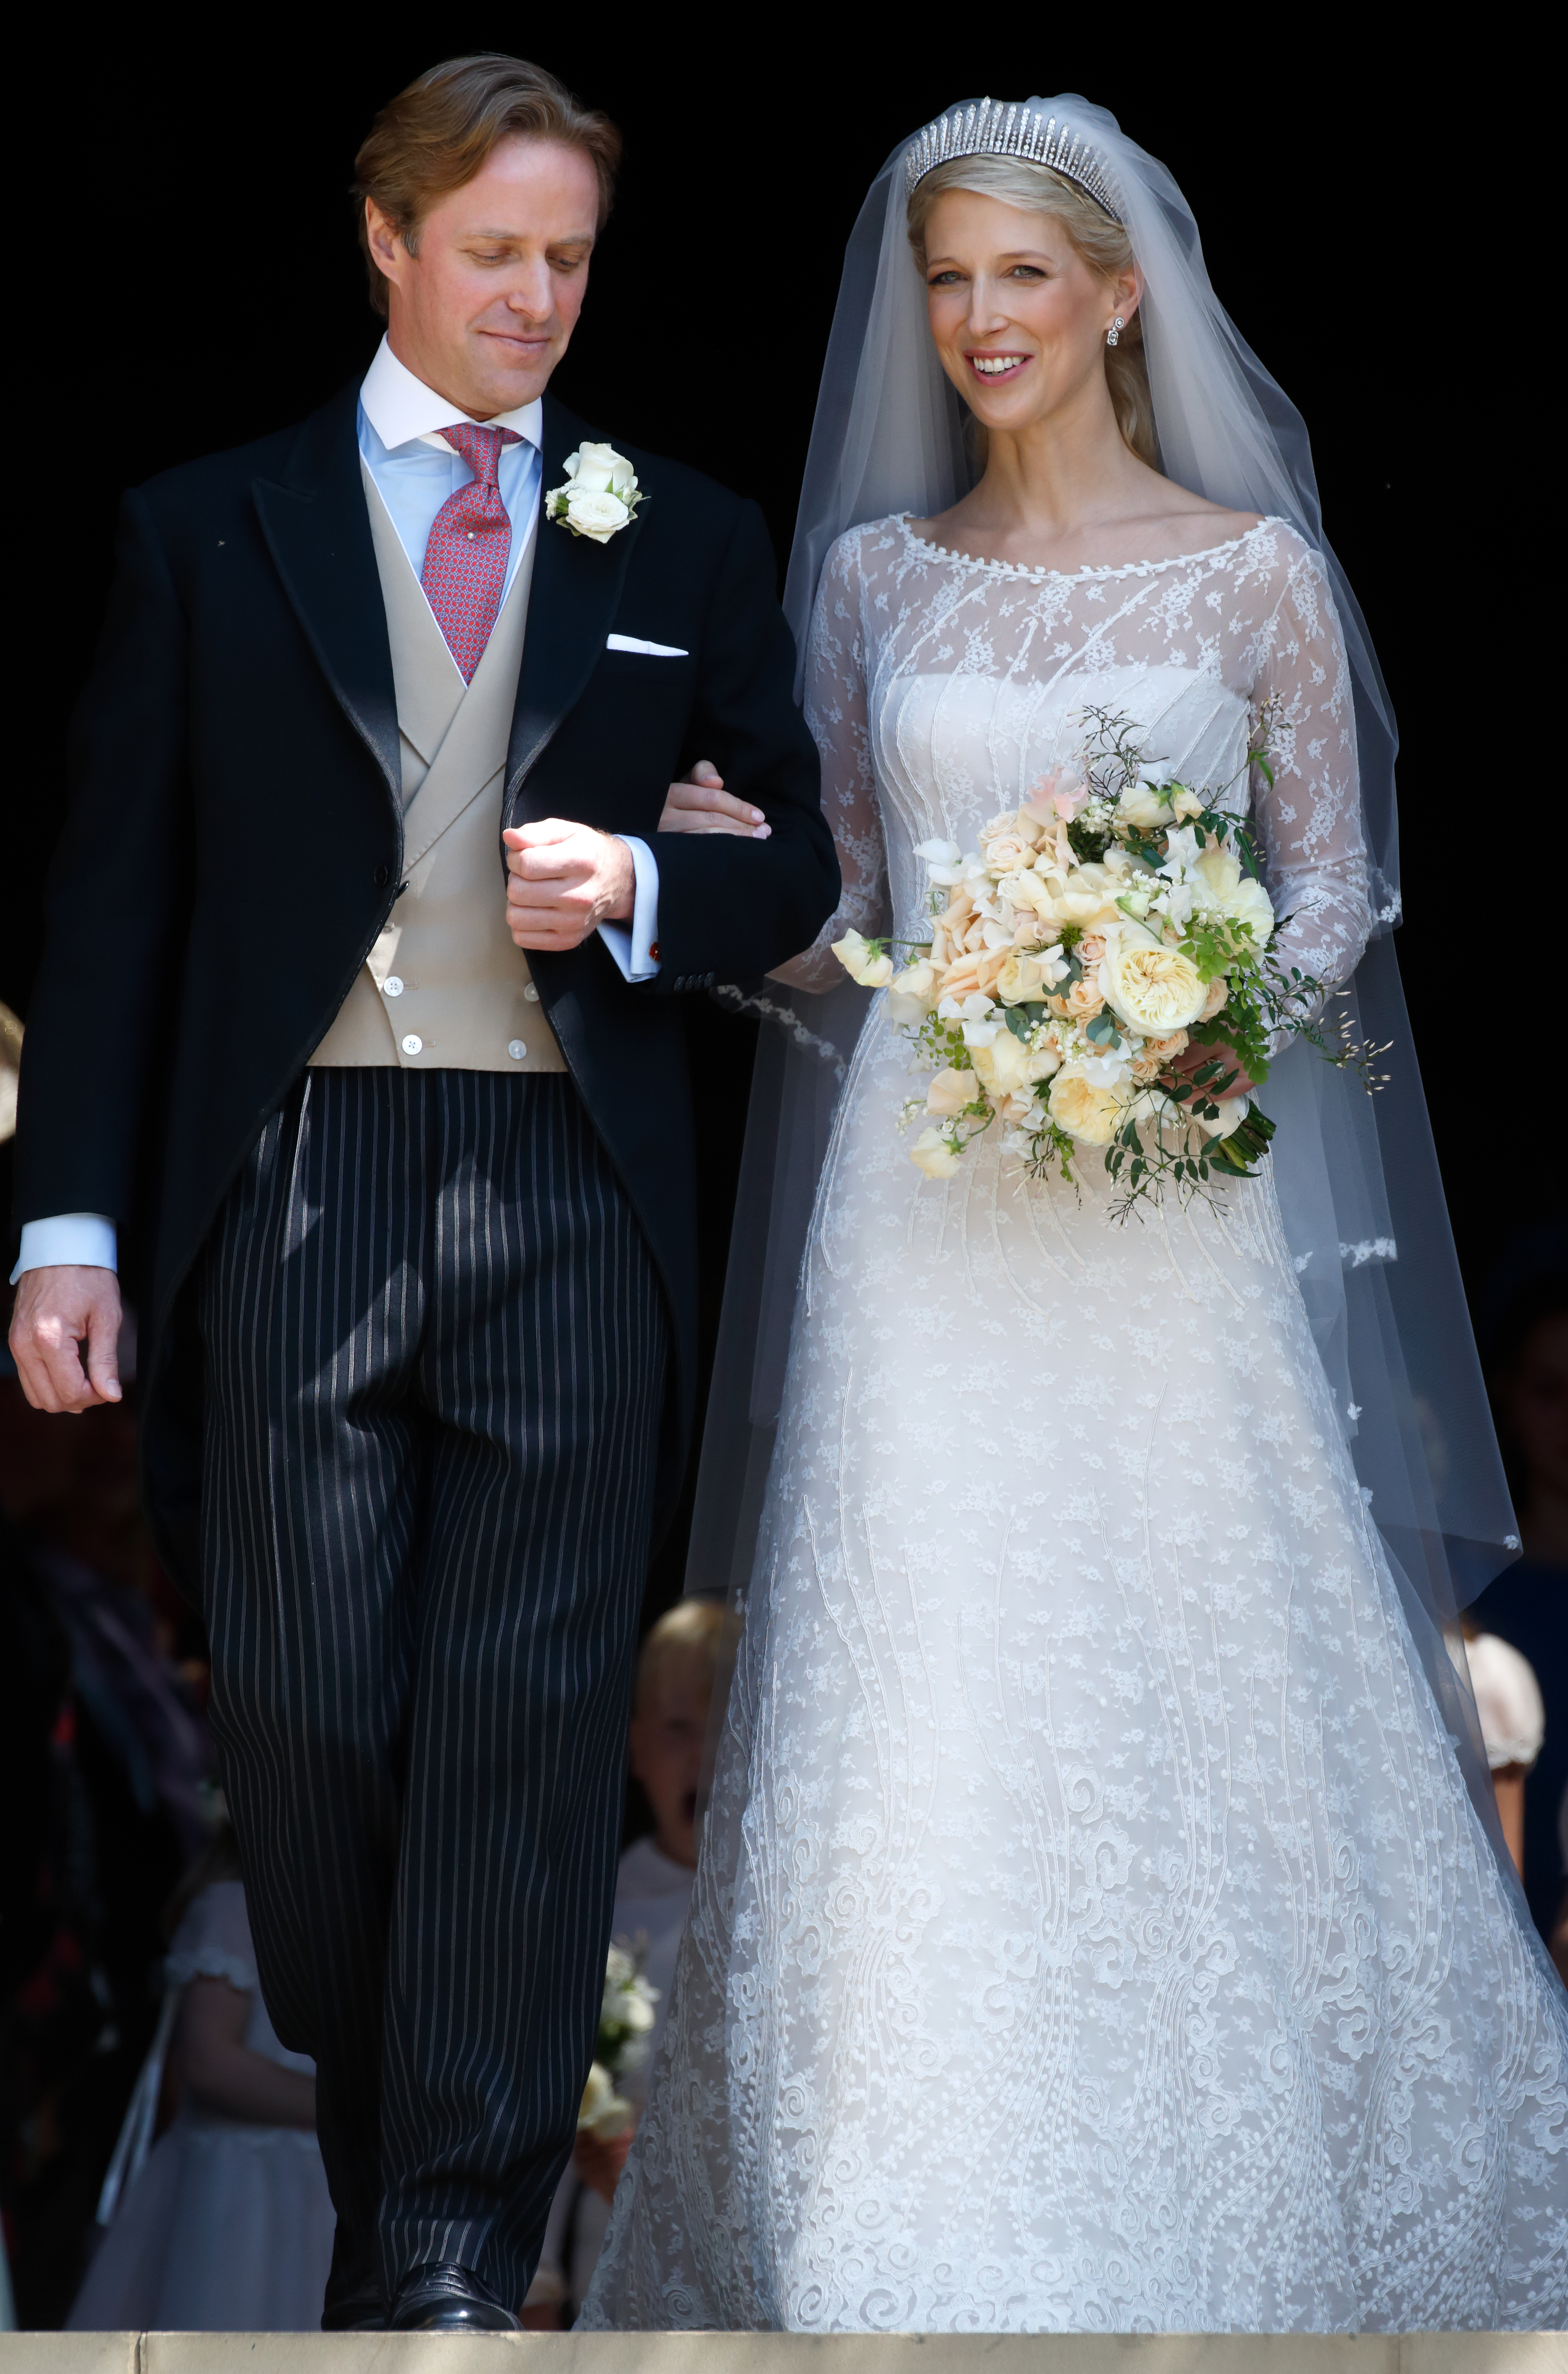 Thomas Kingston and Lady Gabriella on their wedding day in Windsor, England on May 18, 2019 | Source: Getty Images